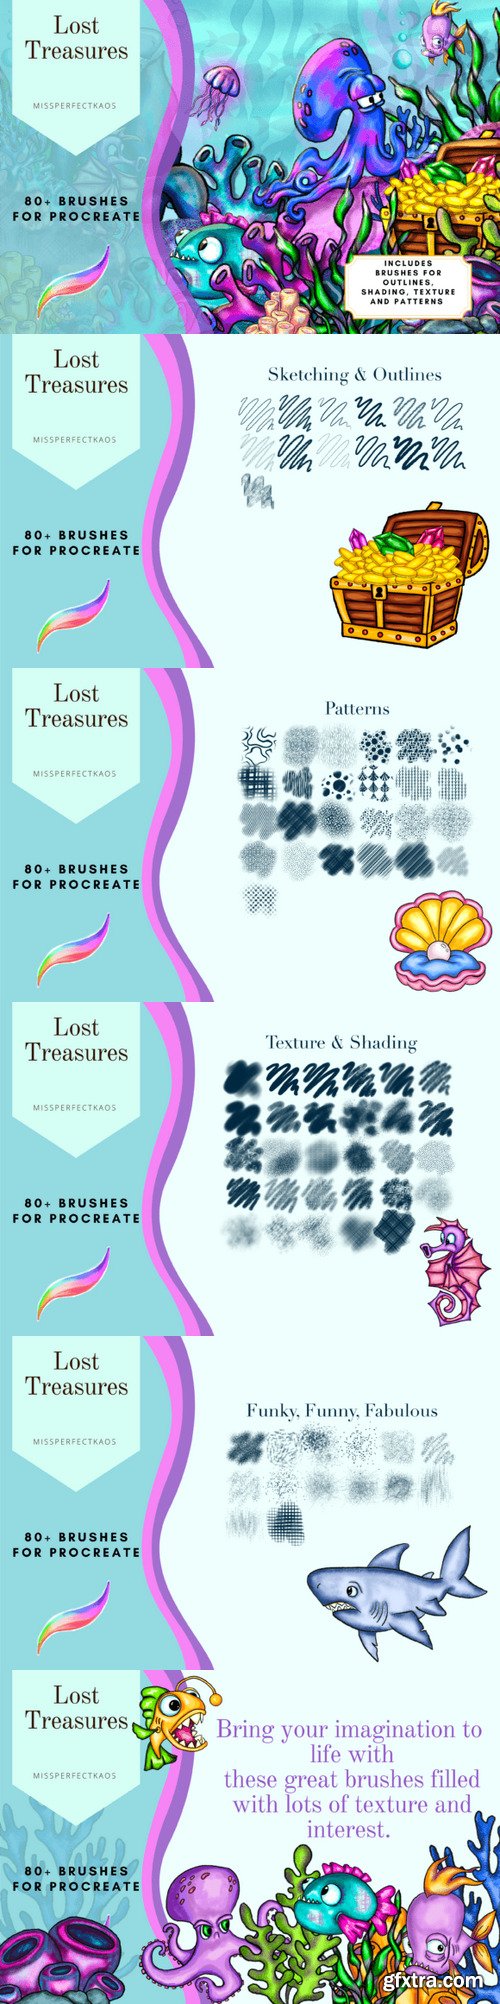 Lost Treasures - 81 Brushes for Procreate